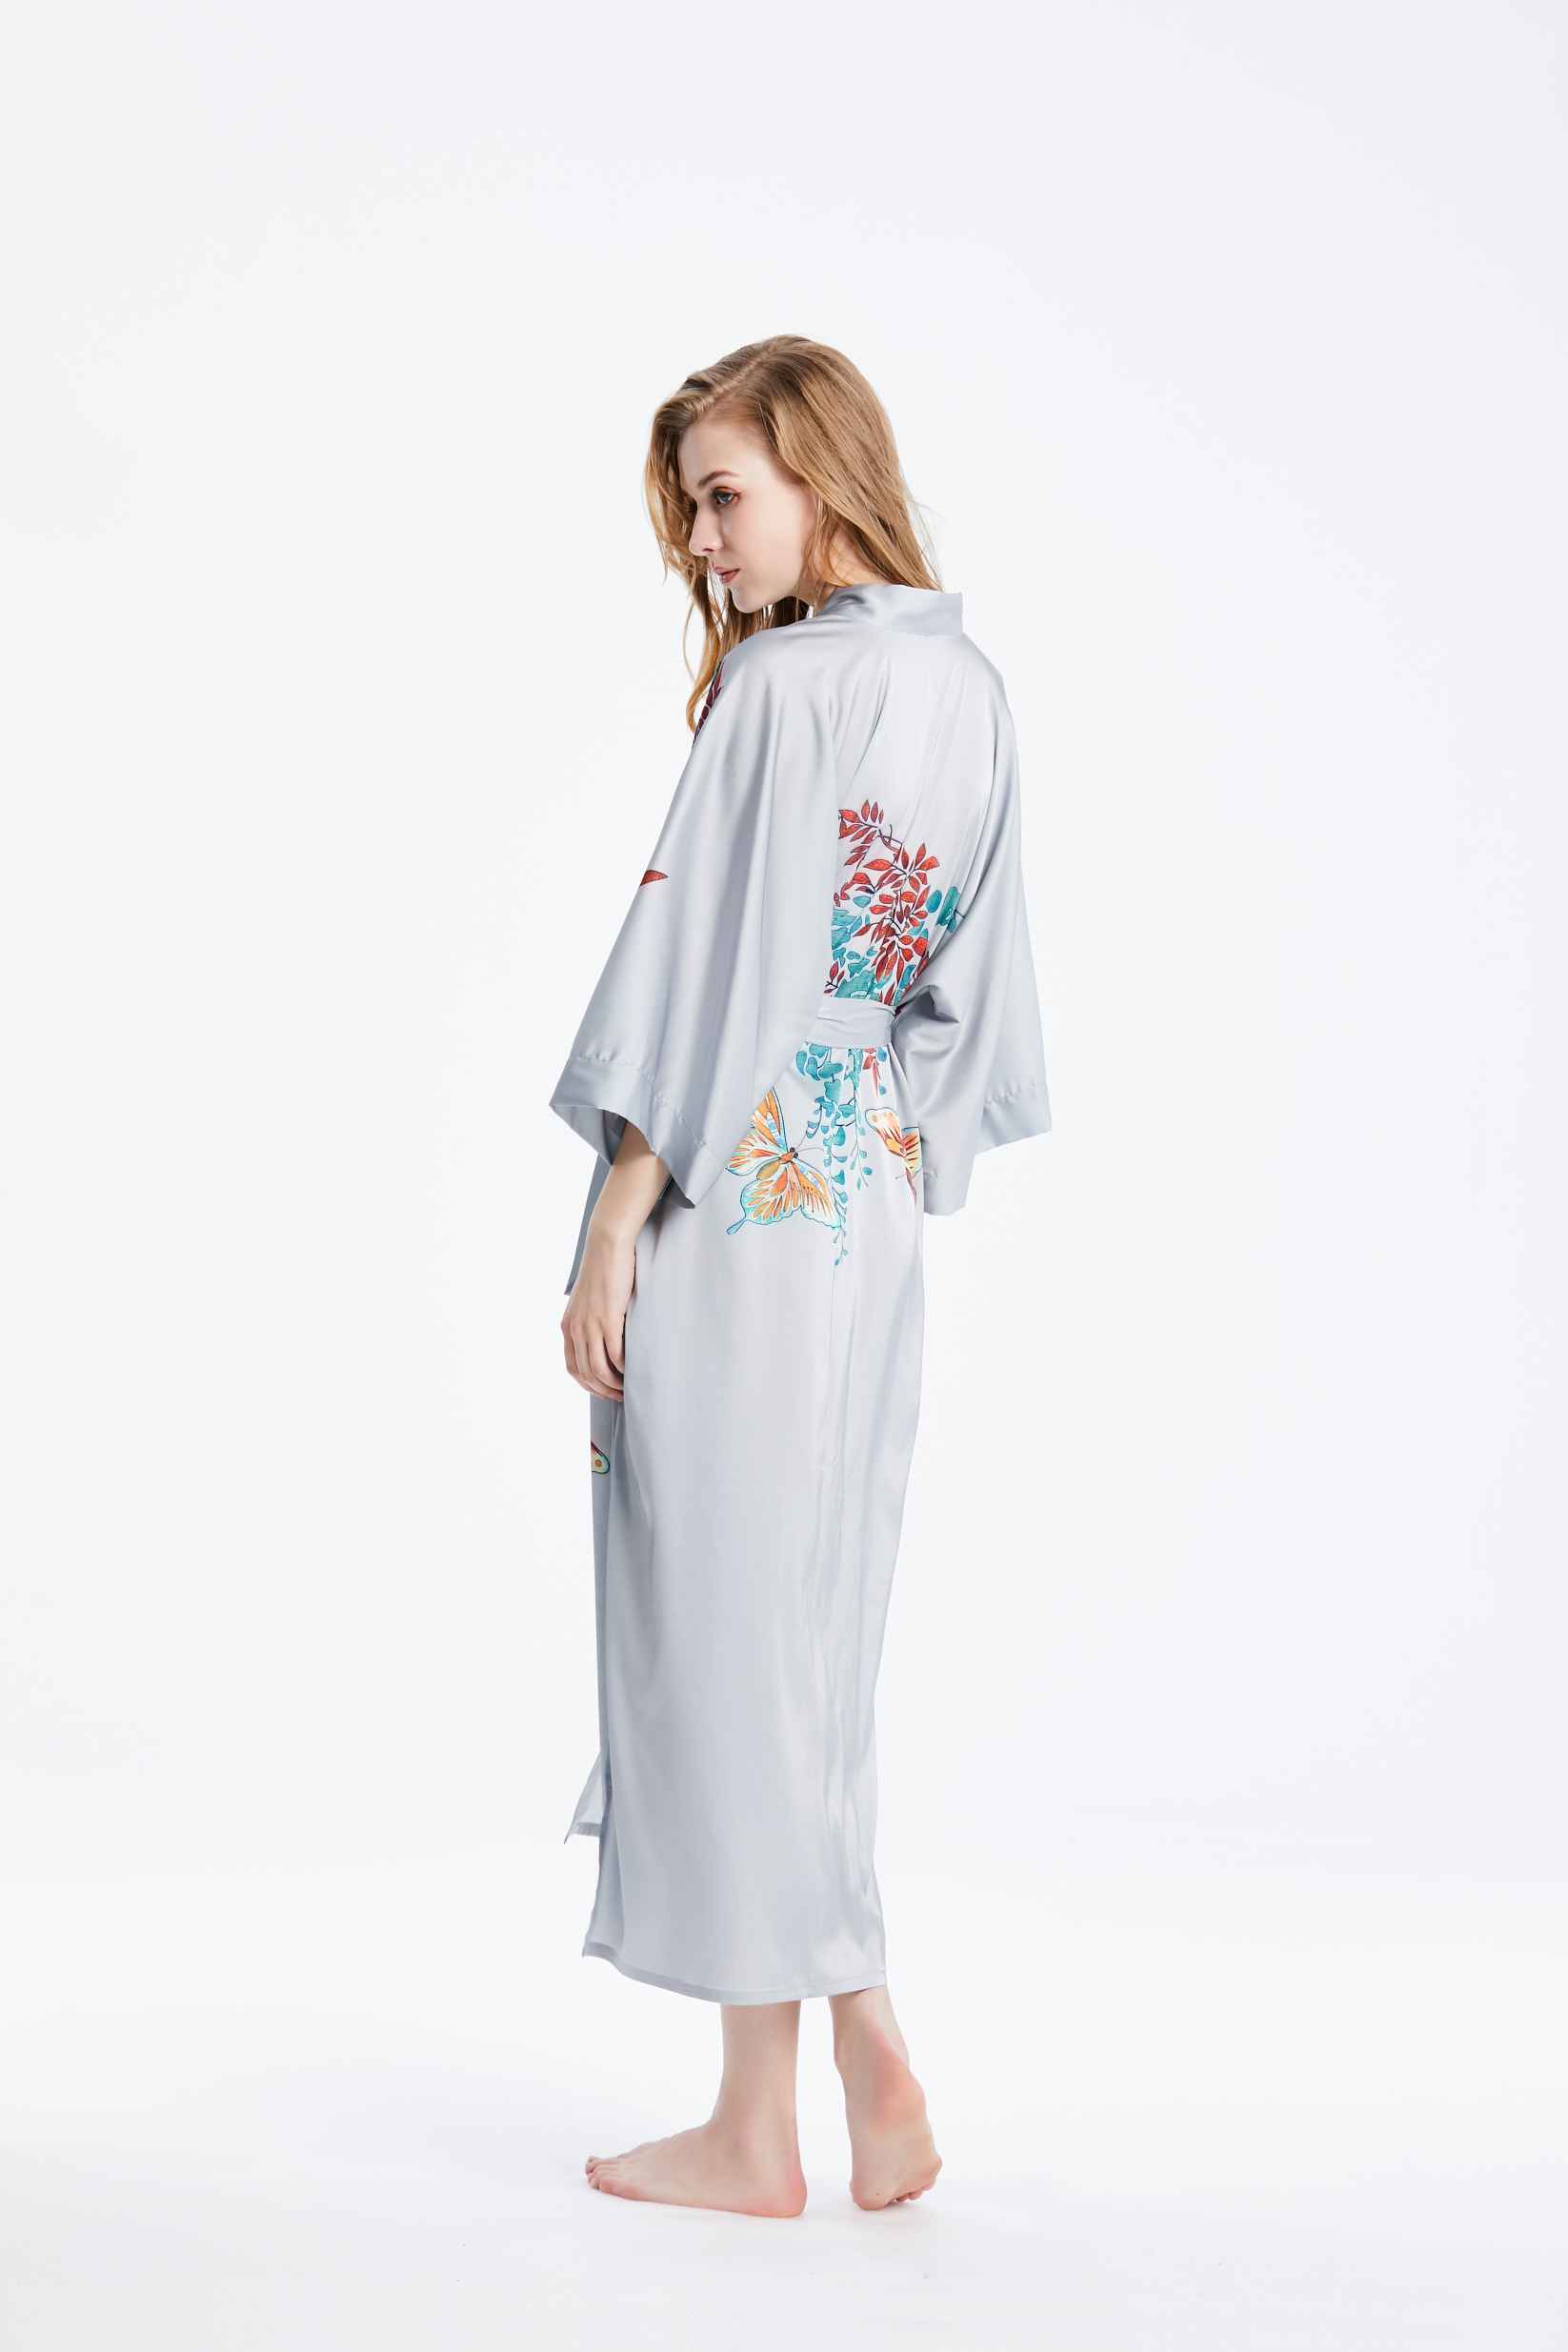 Best Ladies Long Authentic Silk Gray Kimono Robe Nightgown with Custom Floral Print Factory Wholesale